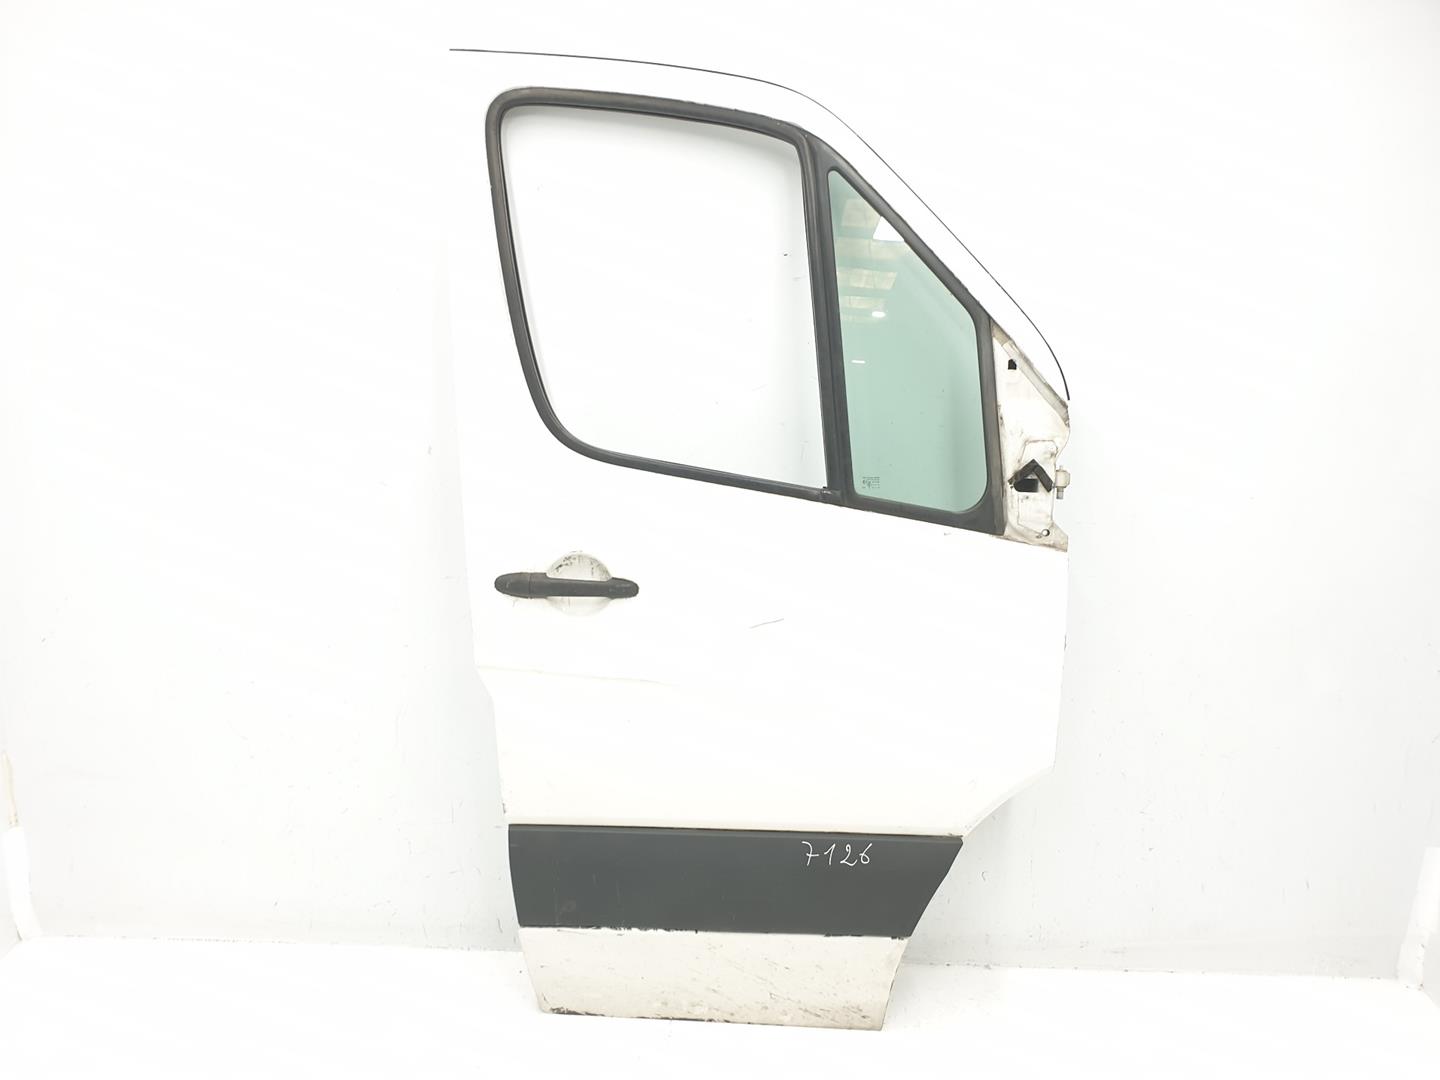 VOLKSWAGEN Crafter 1 generation (2006-2016) Front Right Door 2E0831052, 2E0831052, COLORBLANCOB9A 24473661